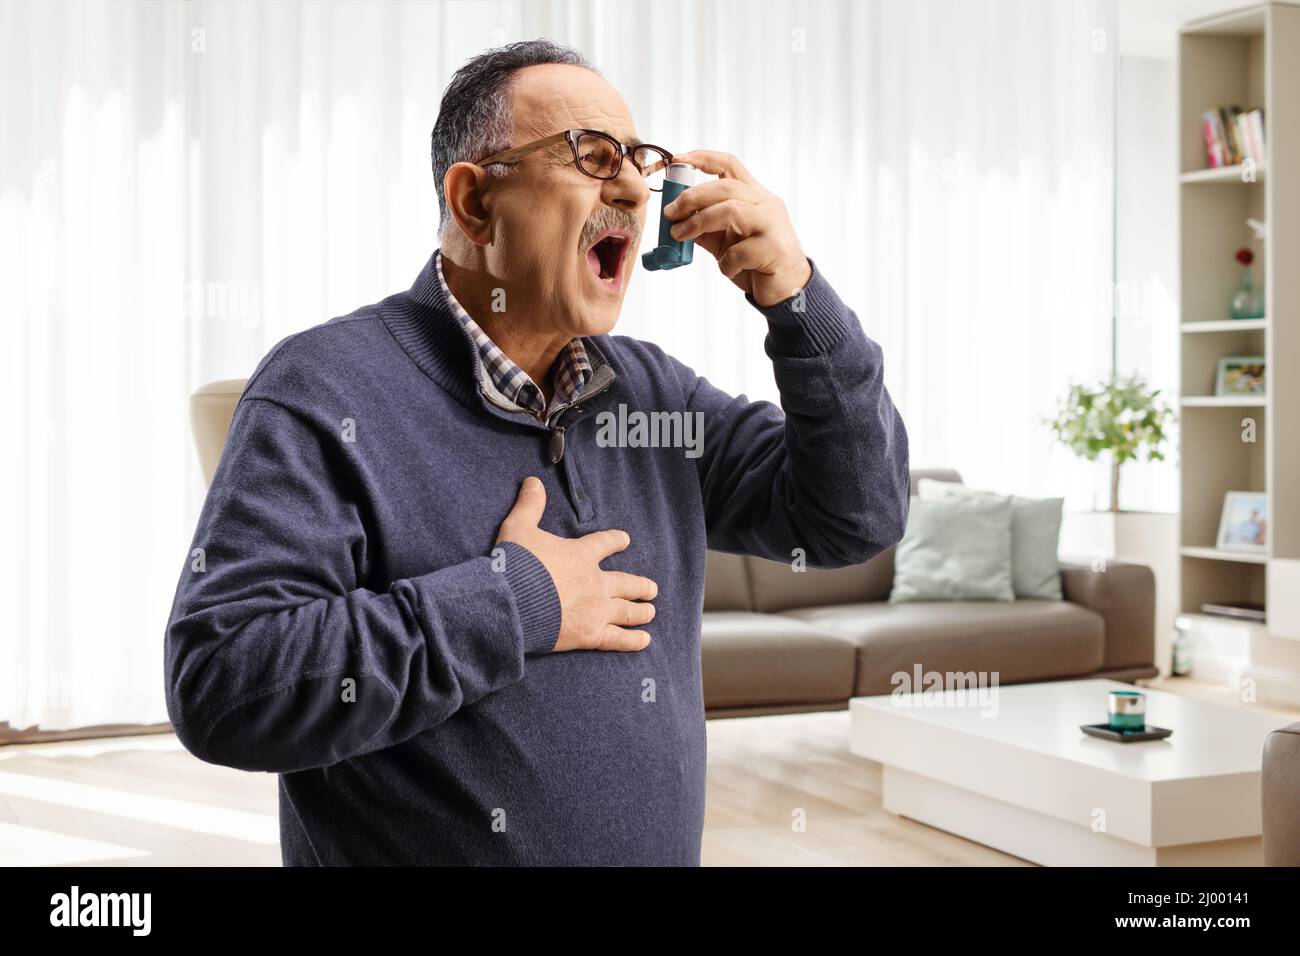 Mature man using an inhaler at home in a living room Stock Photo